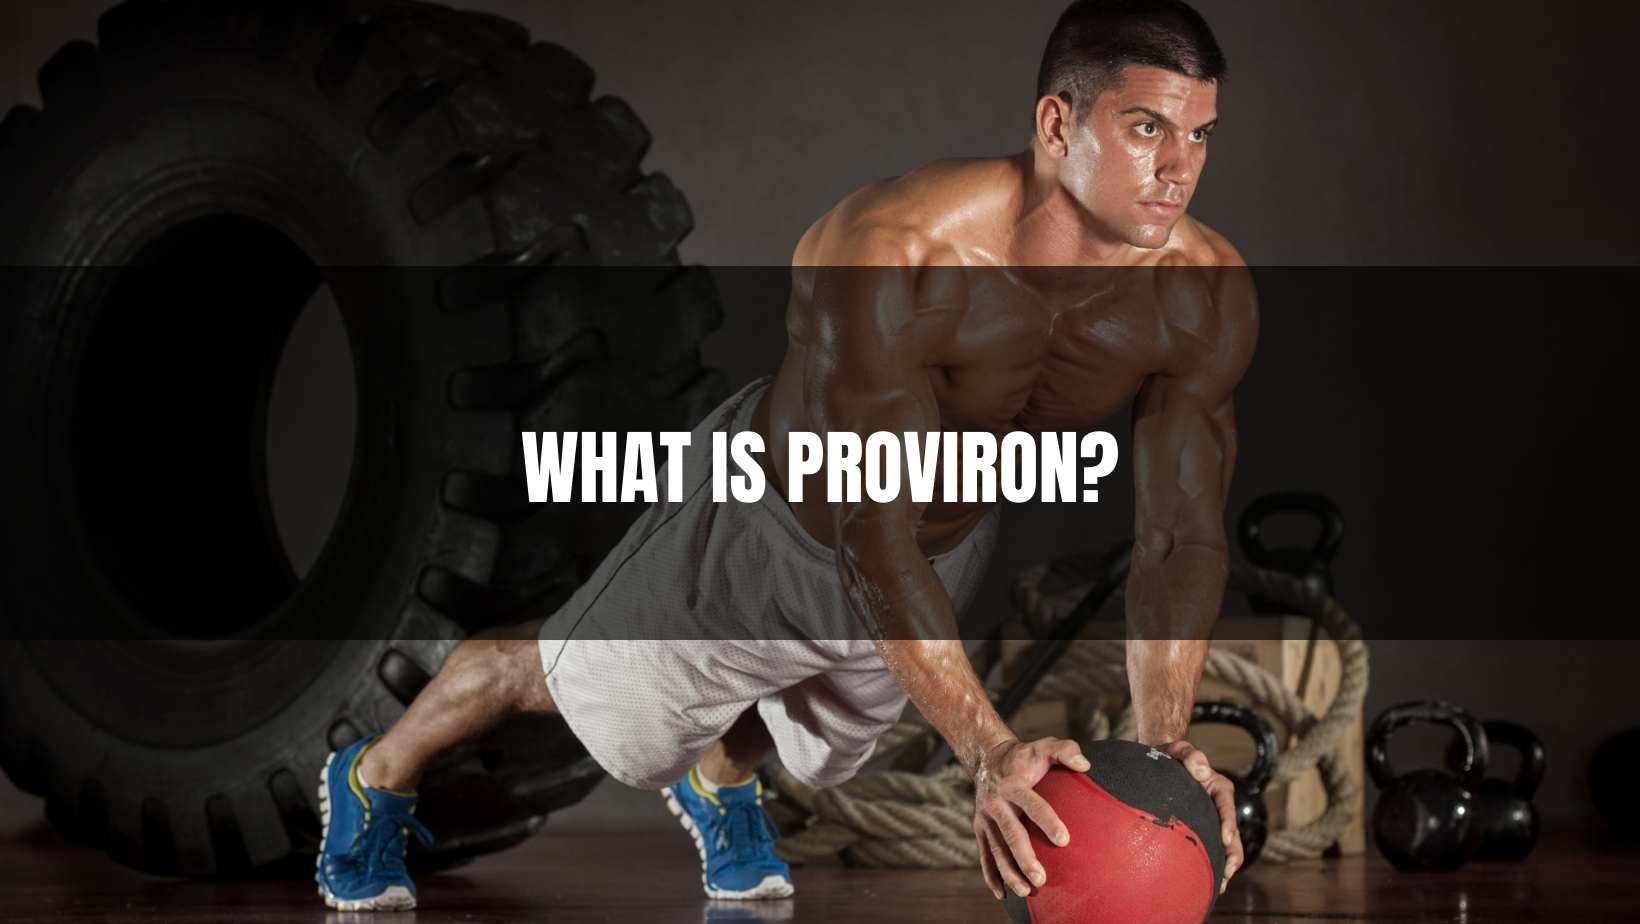 What is Proviron